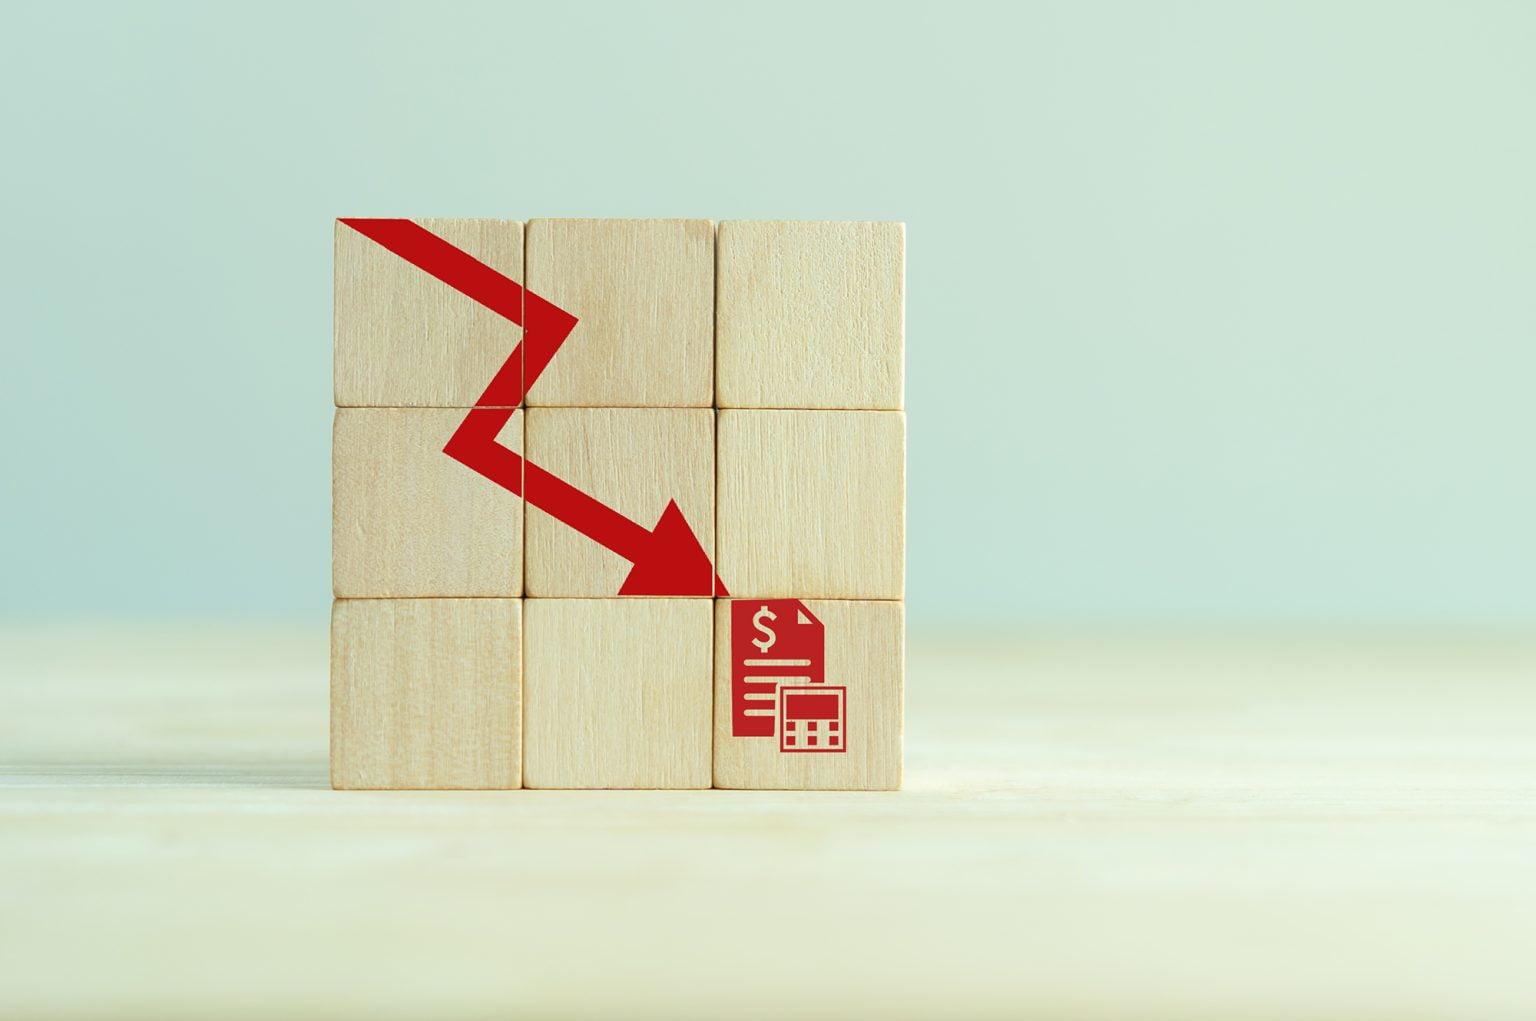 Red arrow pointing down on wooden blocks towards money and calculator